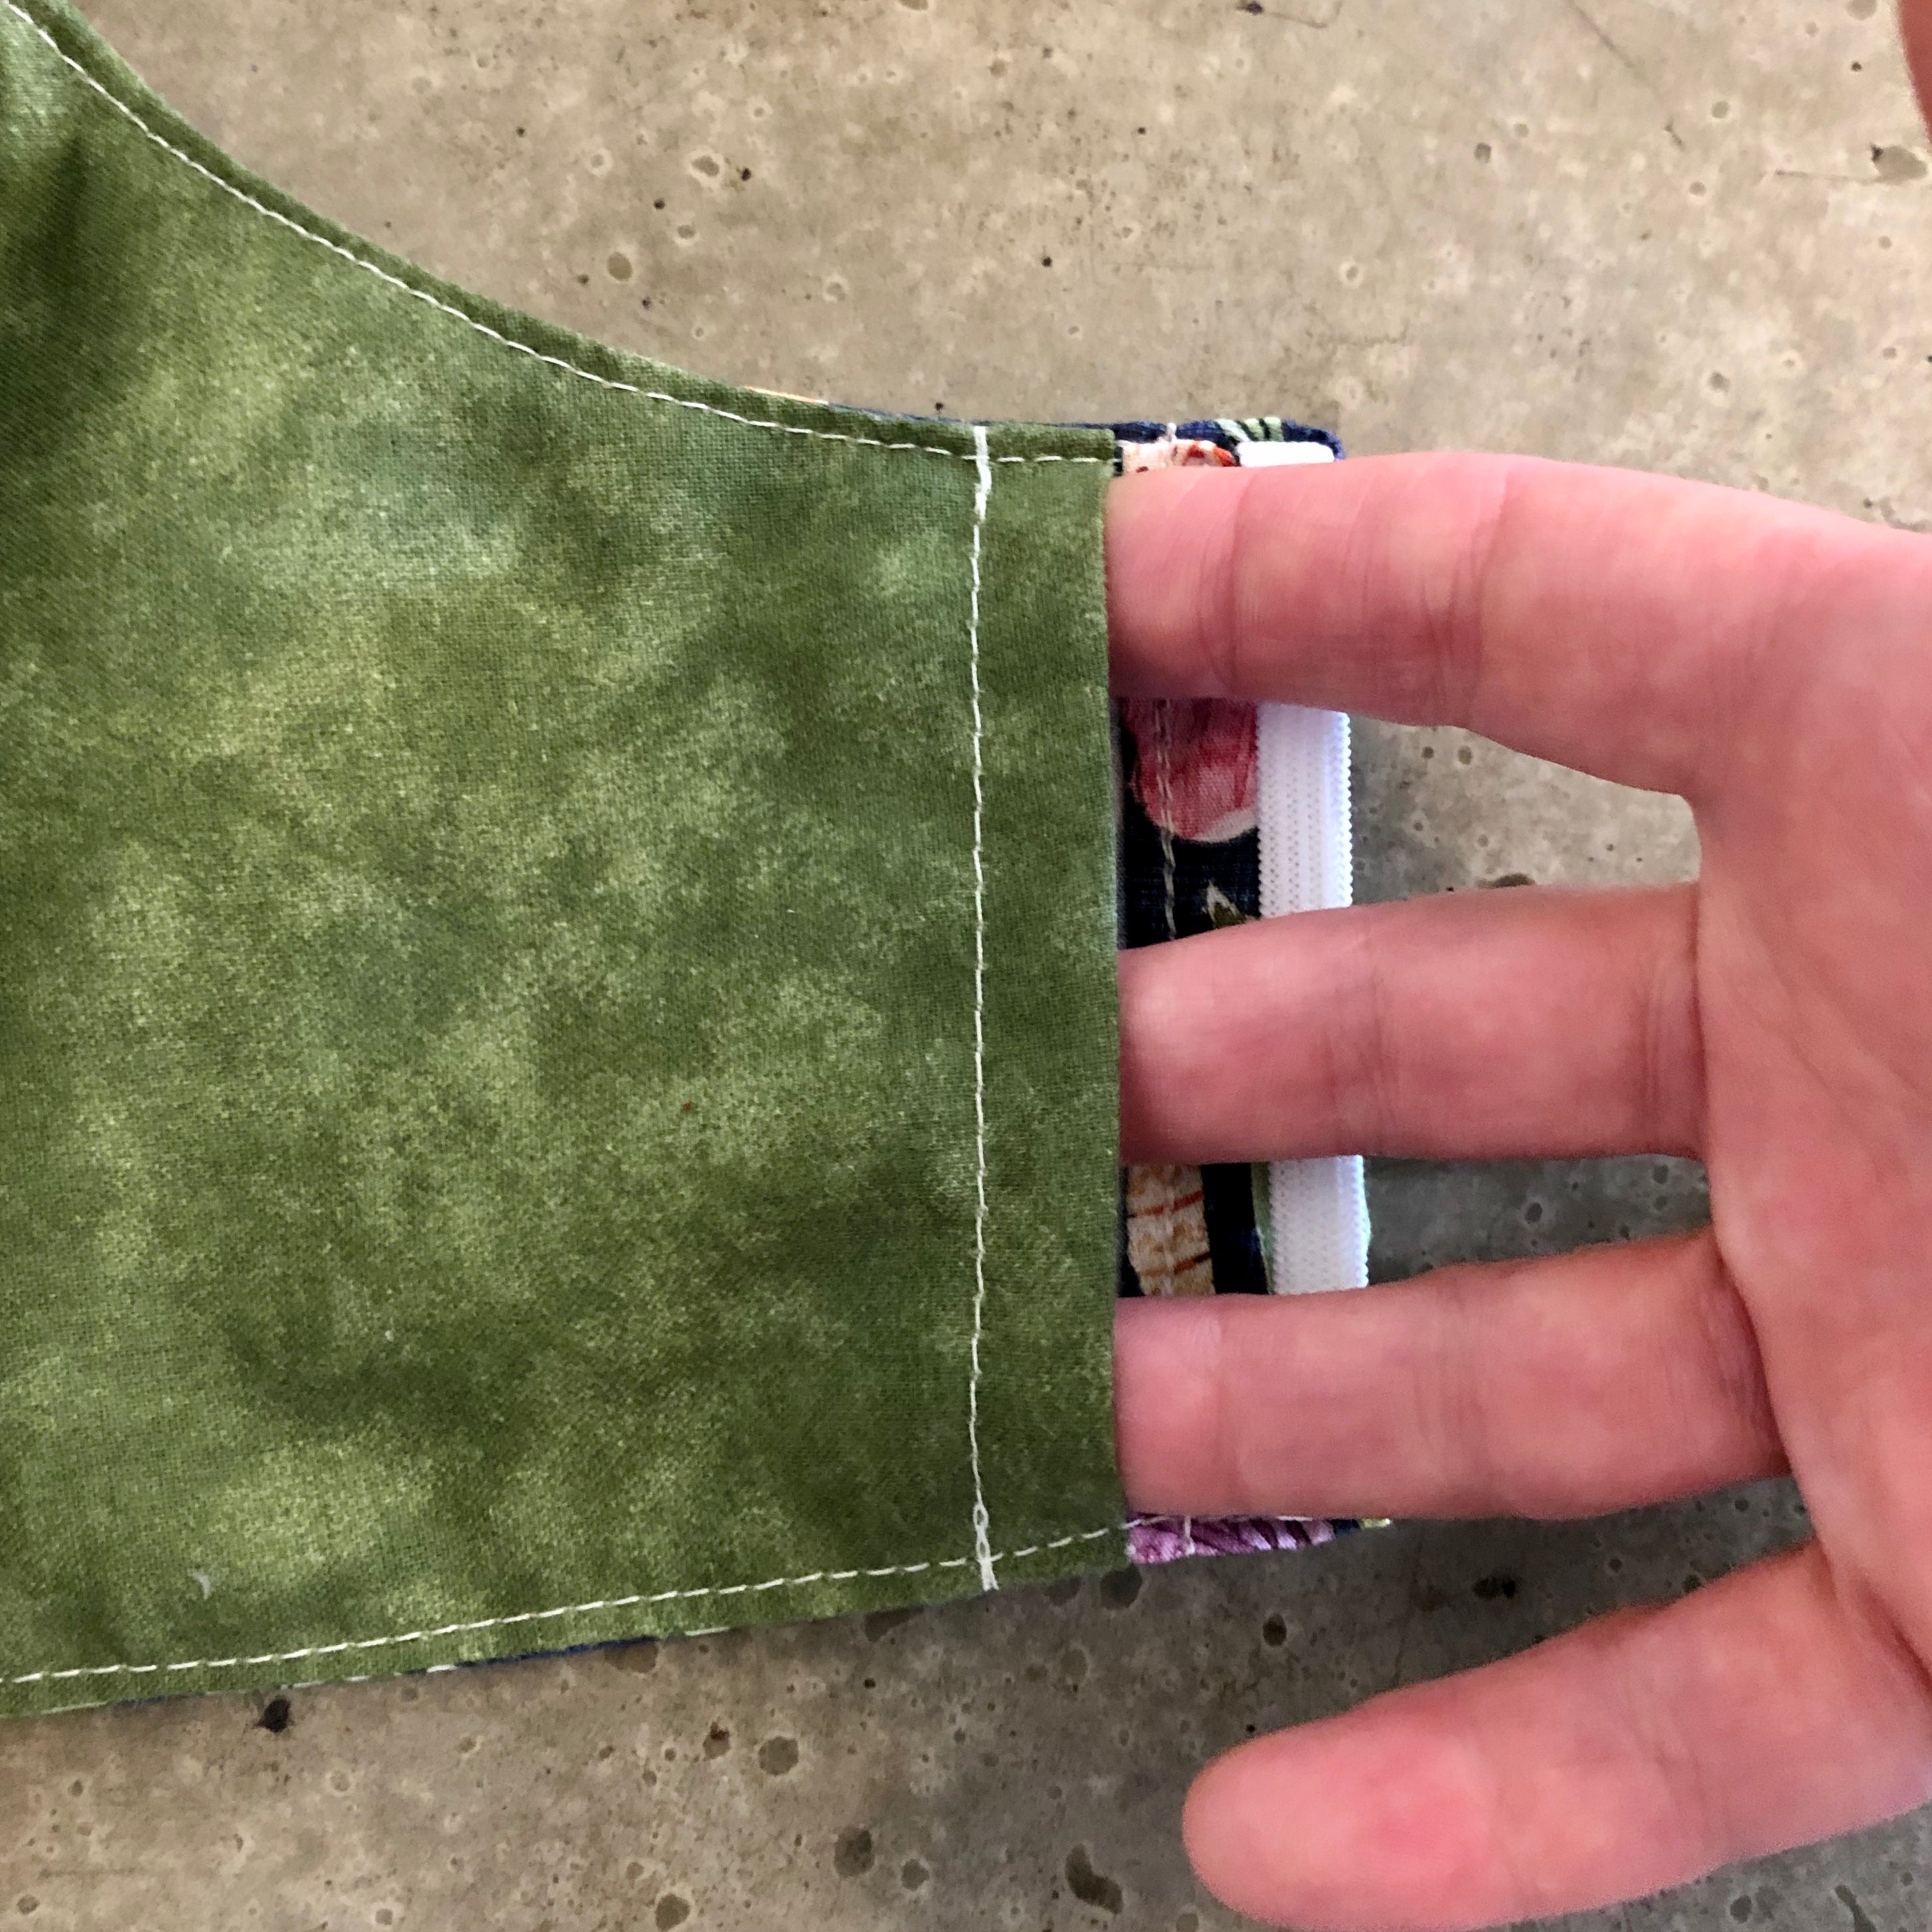 This is a close up of the inside of the fresh vegetable face mask, showing the olive green fabric and the opening to the right side of the filter pocket. There is an identical opening on the left side.